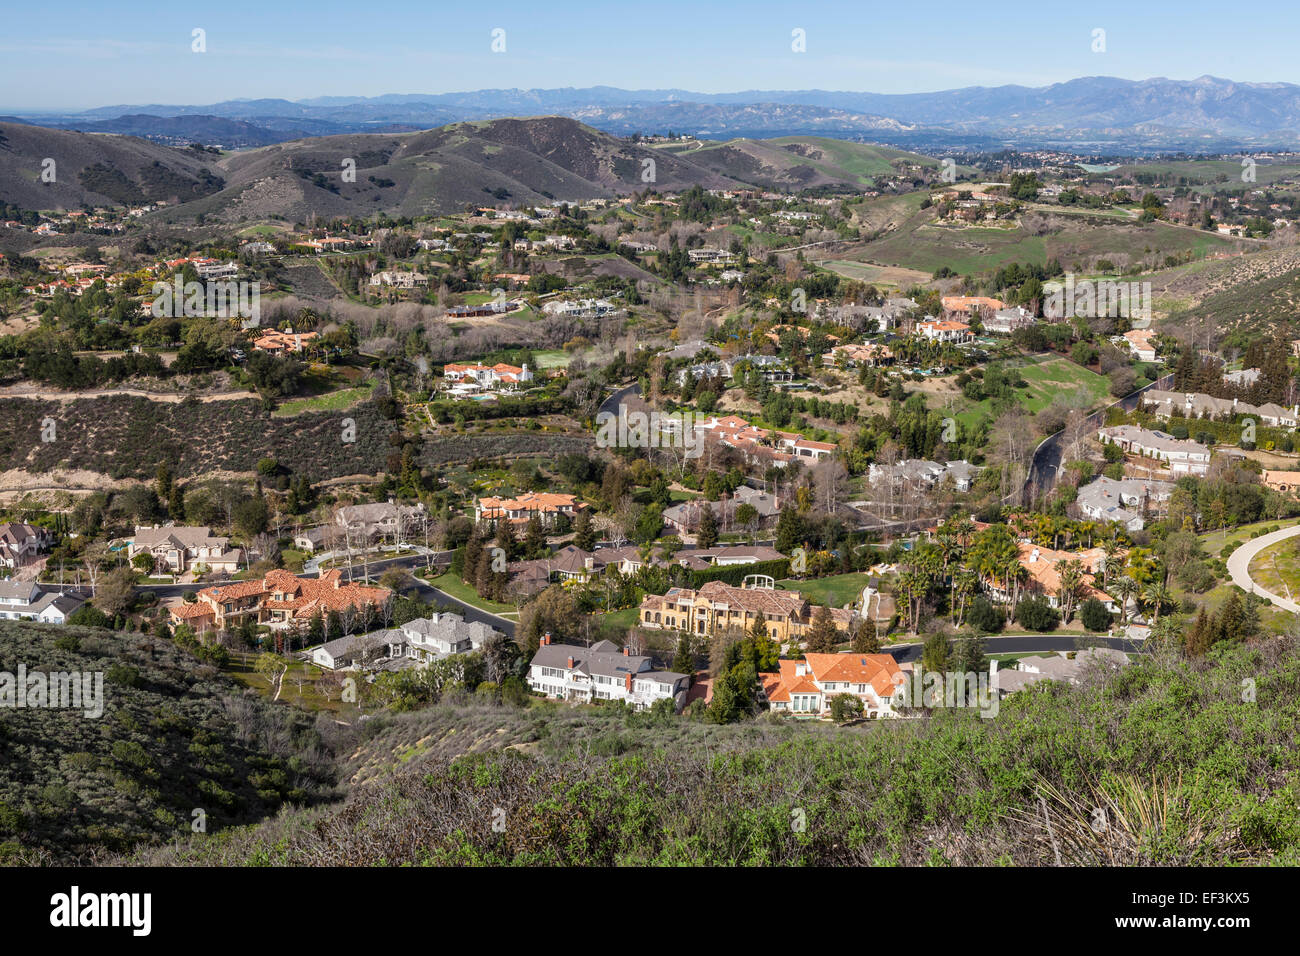 Contemporary valley of mansions in Thousand Oaks near Los Angeles, California. Stock Photo